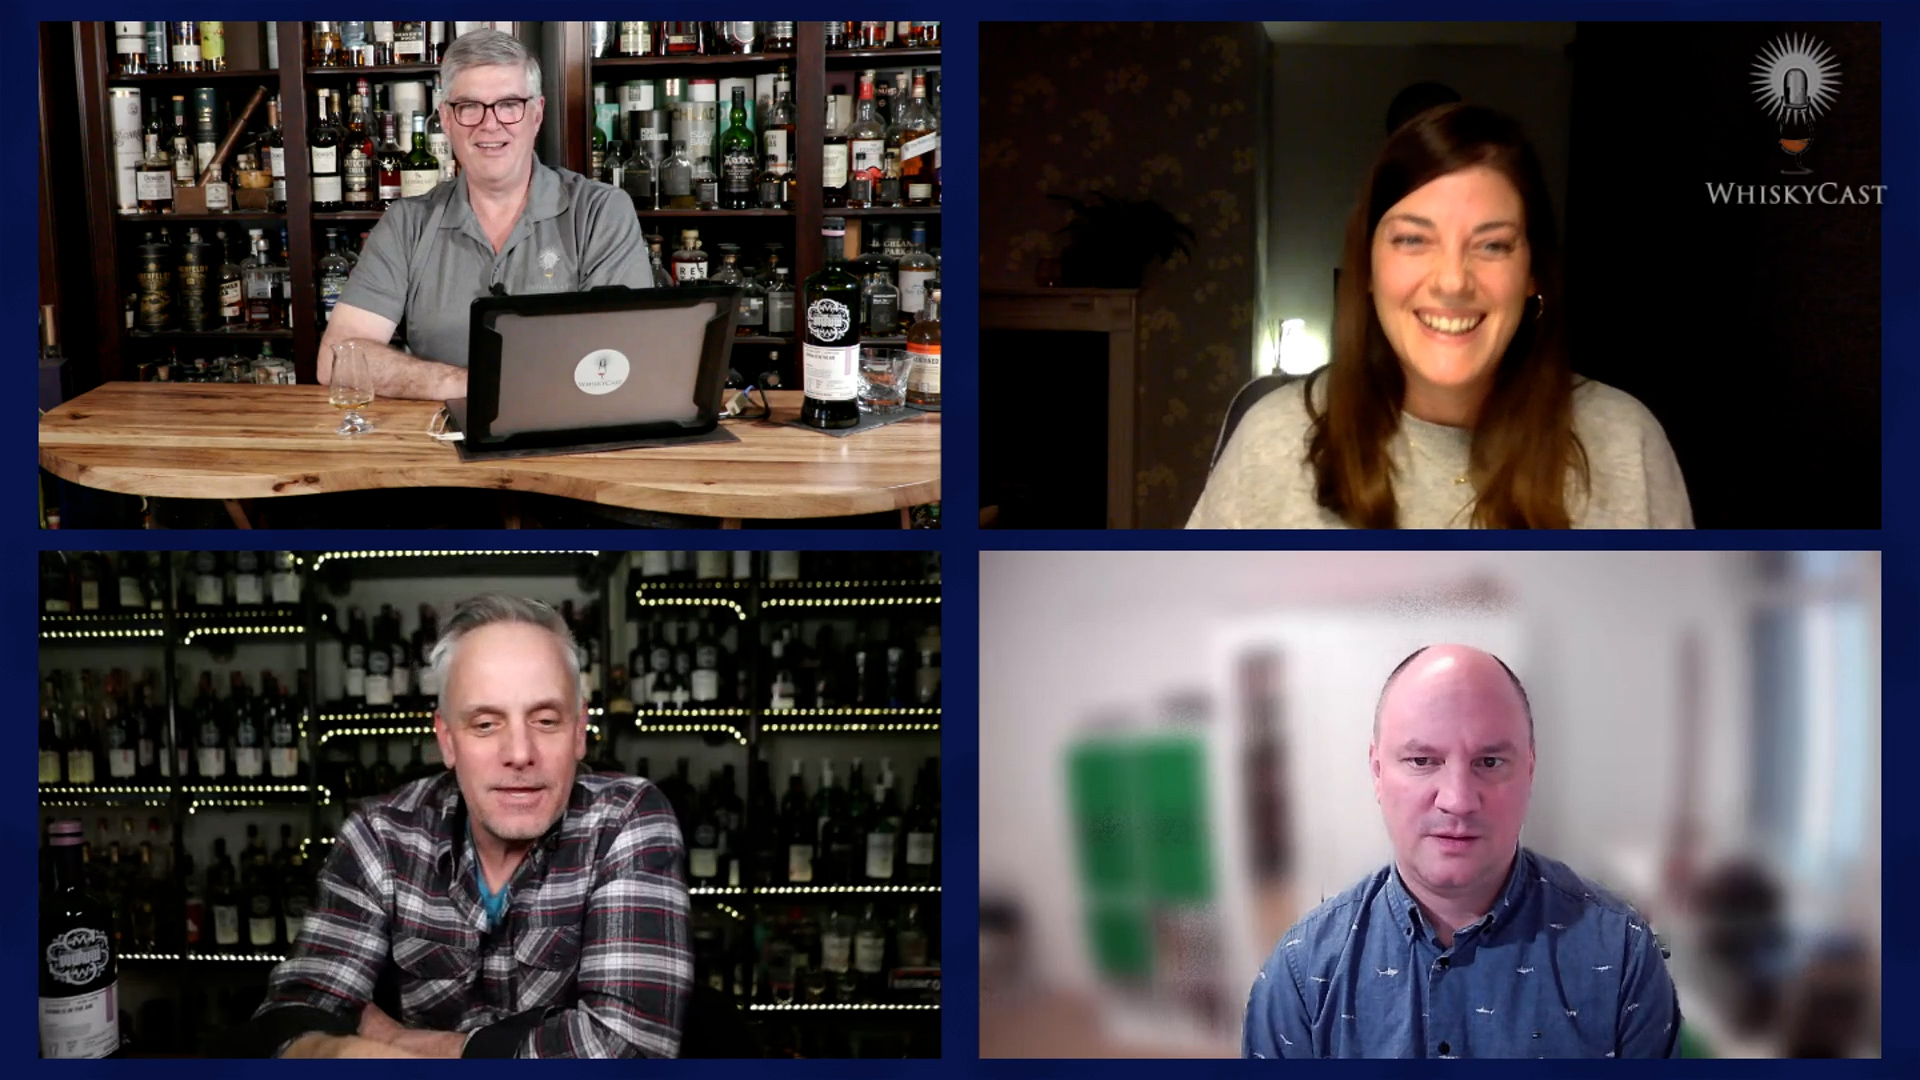 If you missed last night's #HappyHourLive webcast with Becky Paskin, Camper English, and Scott Brunow, the on-demand replay is available now on our YouTube channel!